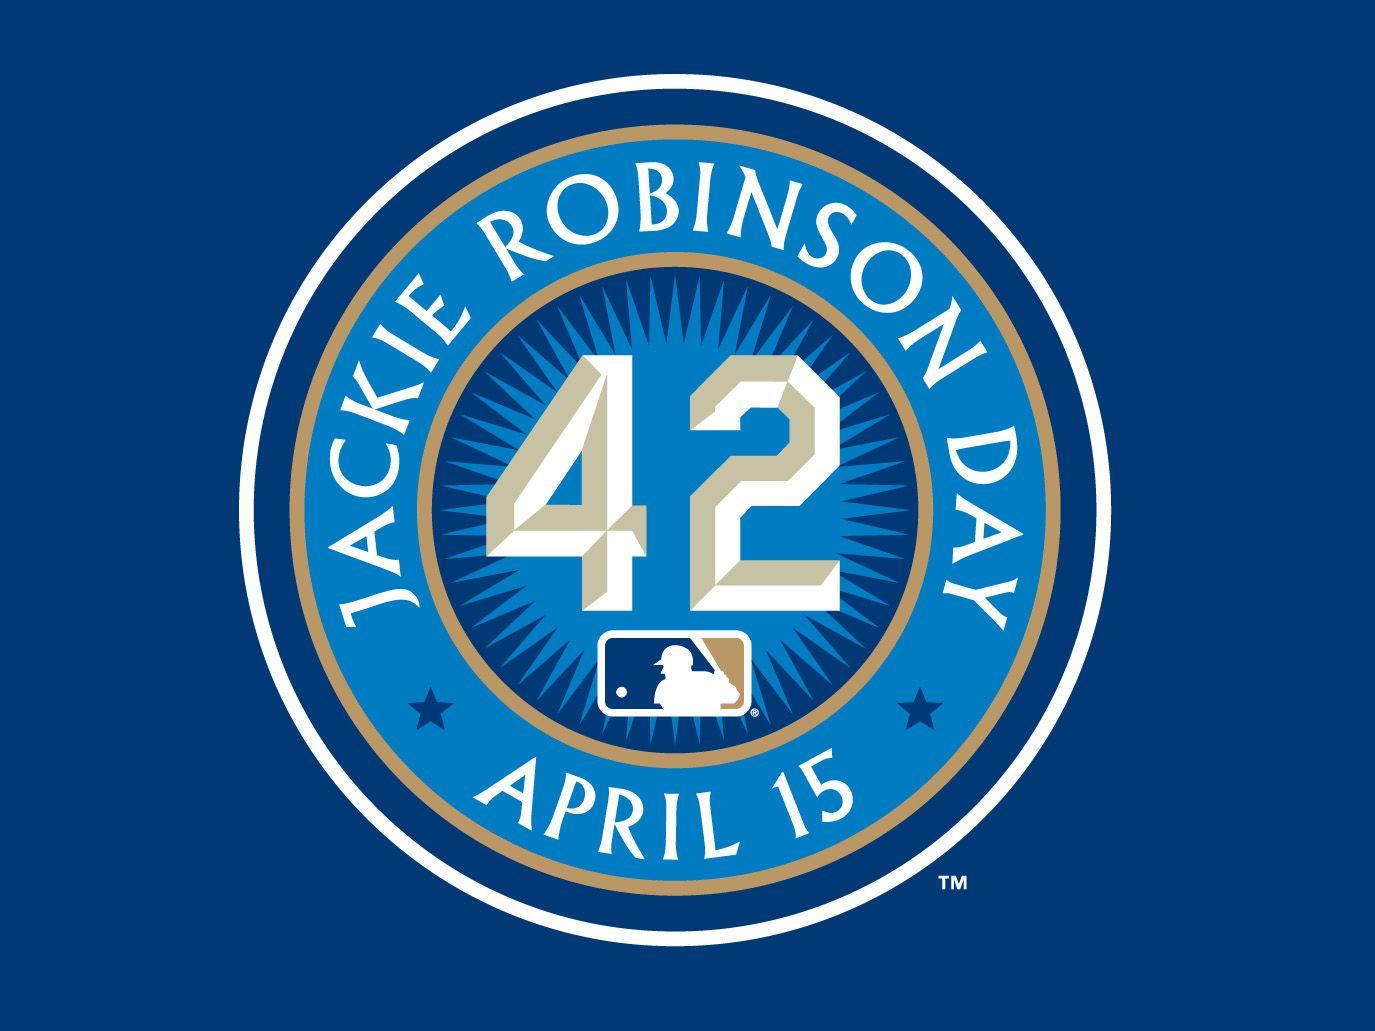 Robinsons 42 in Dodger blue for all uniforms on April 15  The Star